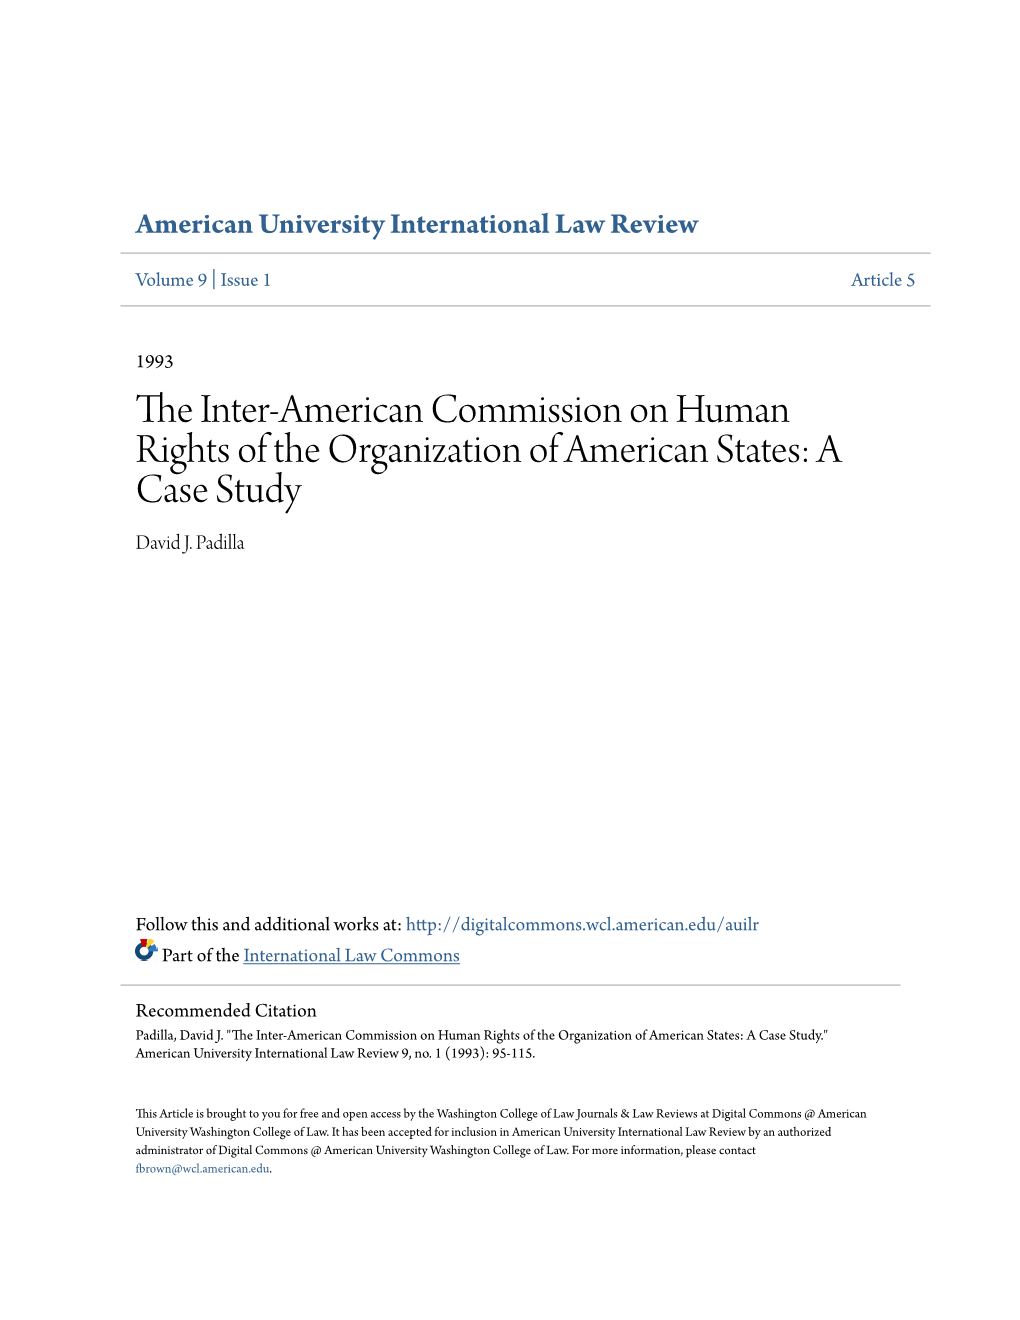 The Inter-American Commission on Human Rights of the Organization of American States: a Case Study